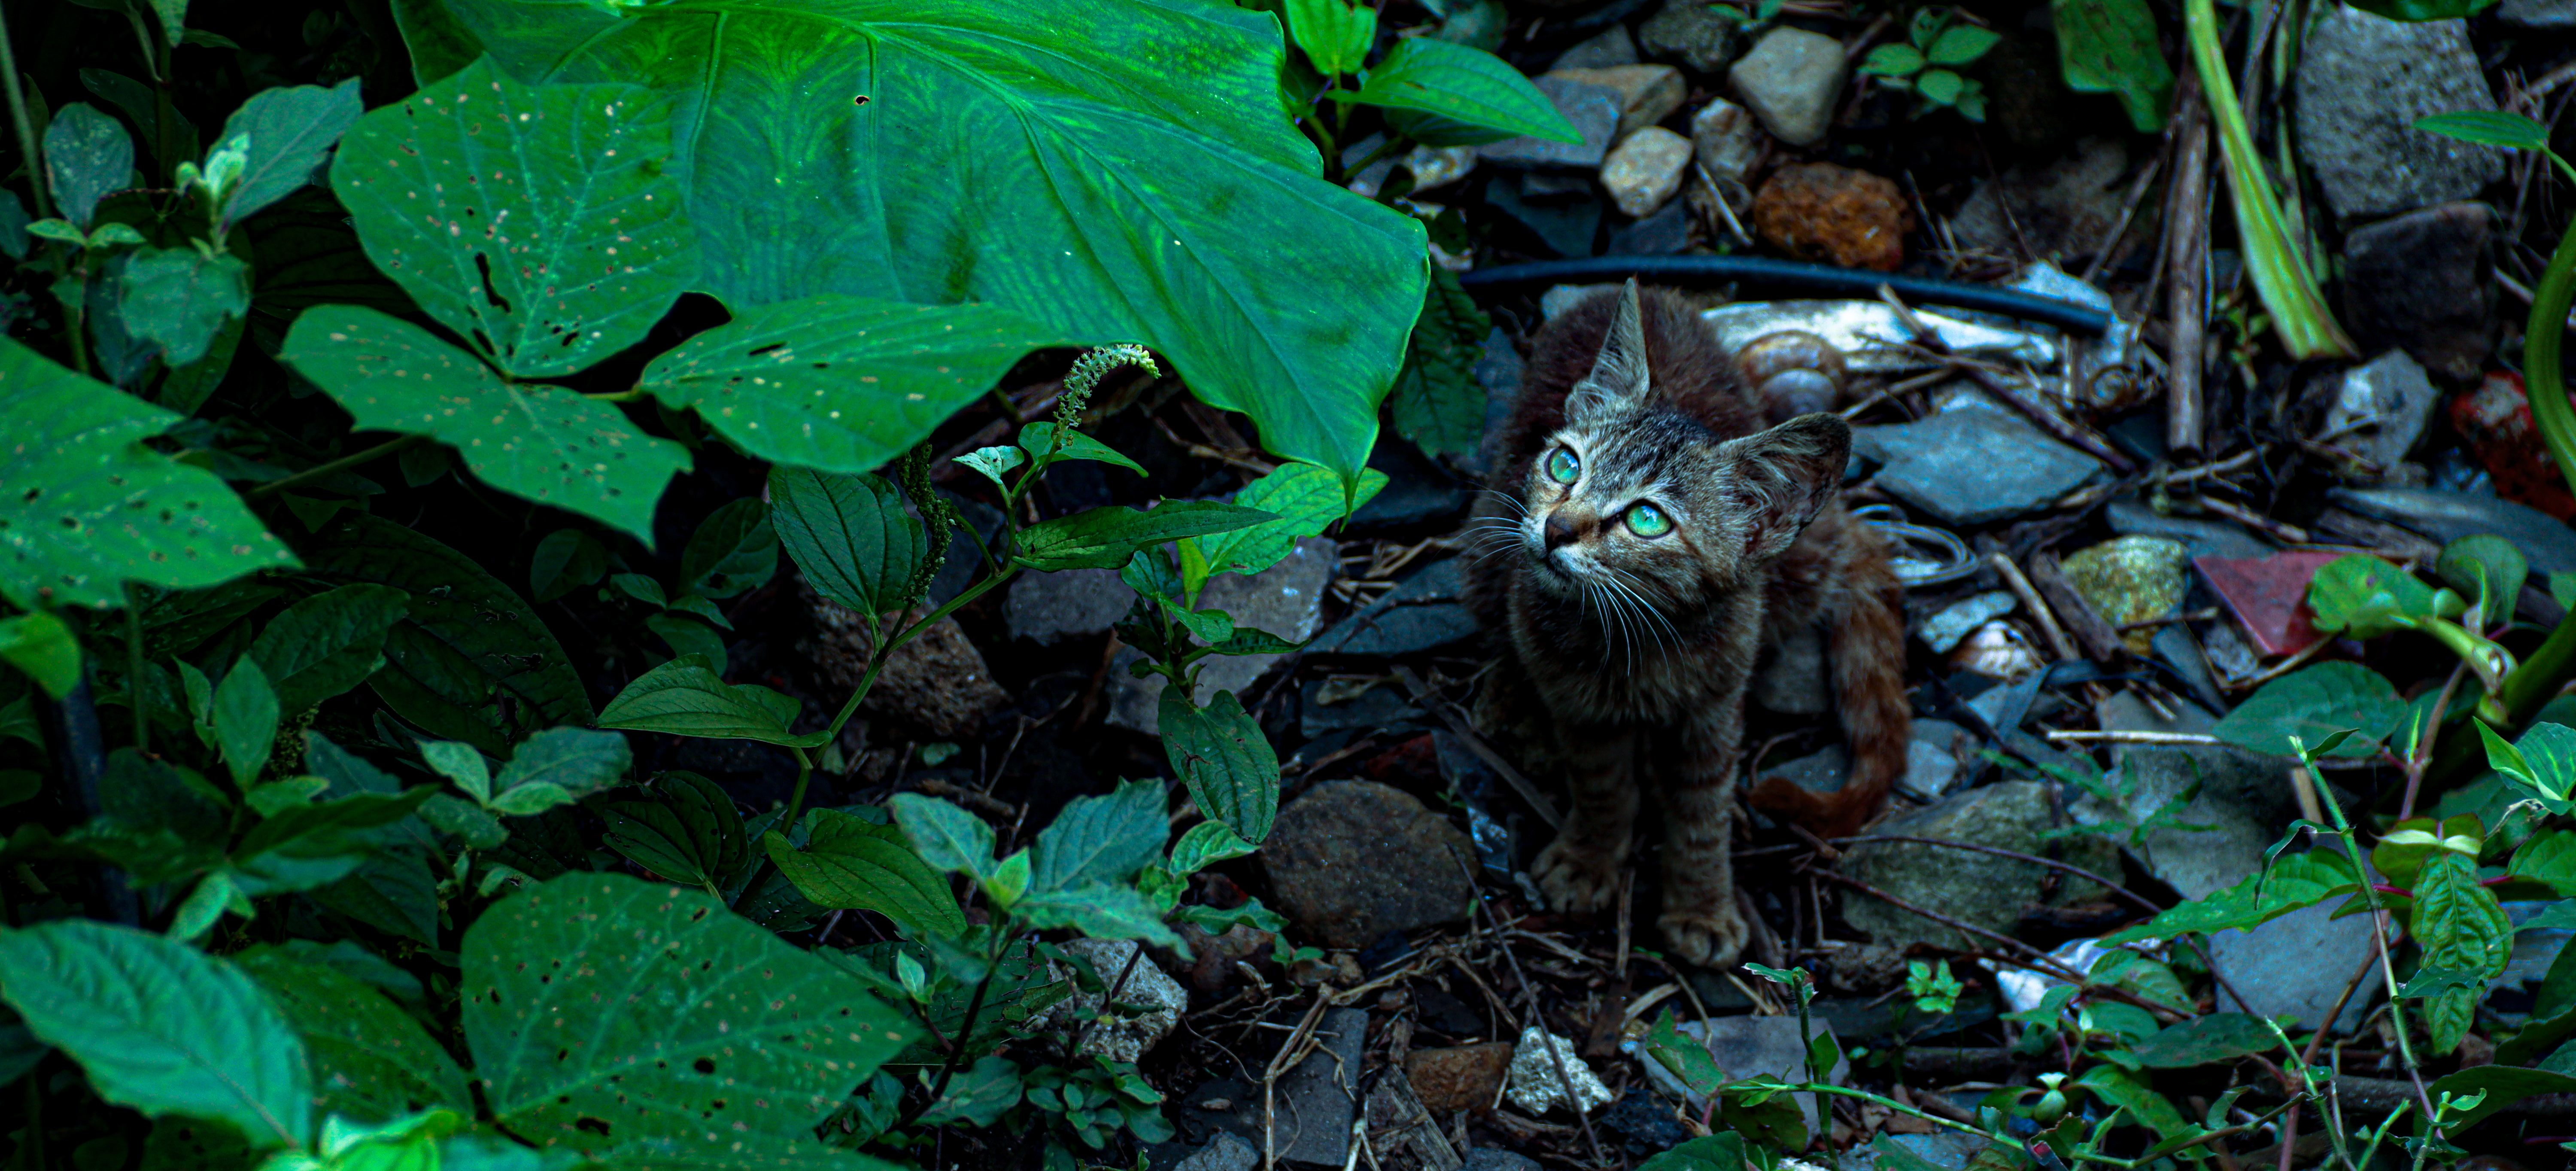 General 6000x2727 cats animal eyes Canon vivid colors animals nature leaves plants